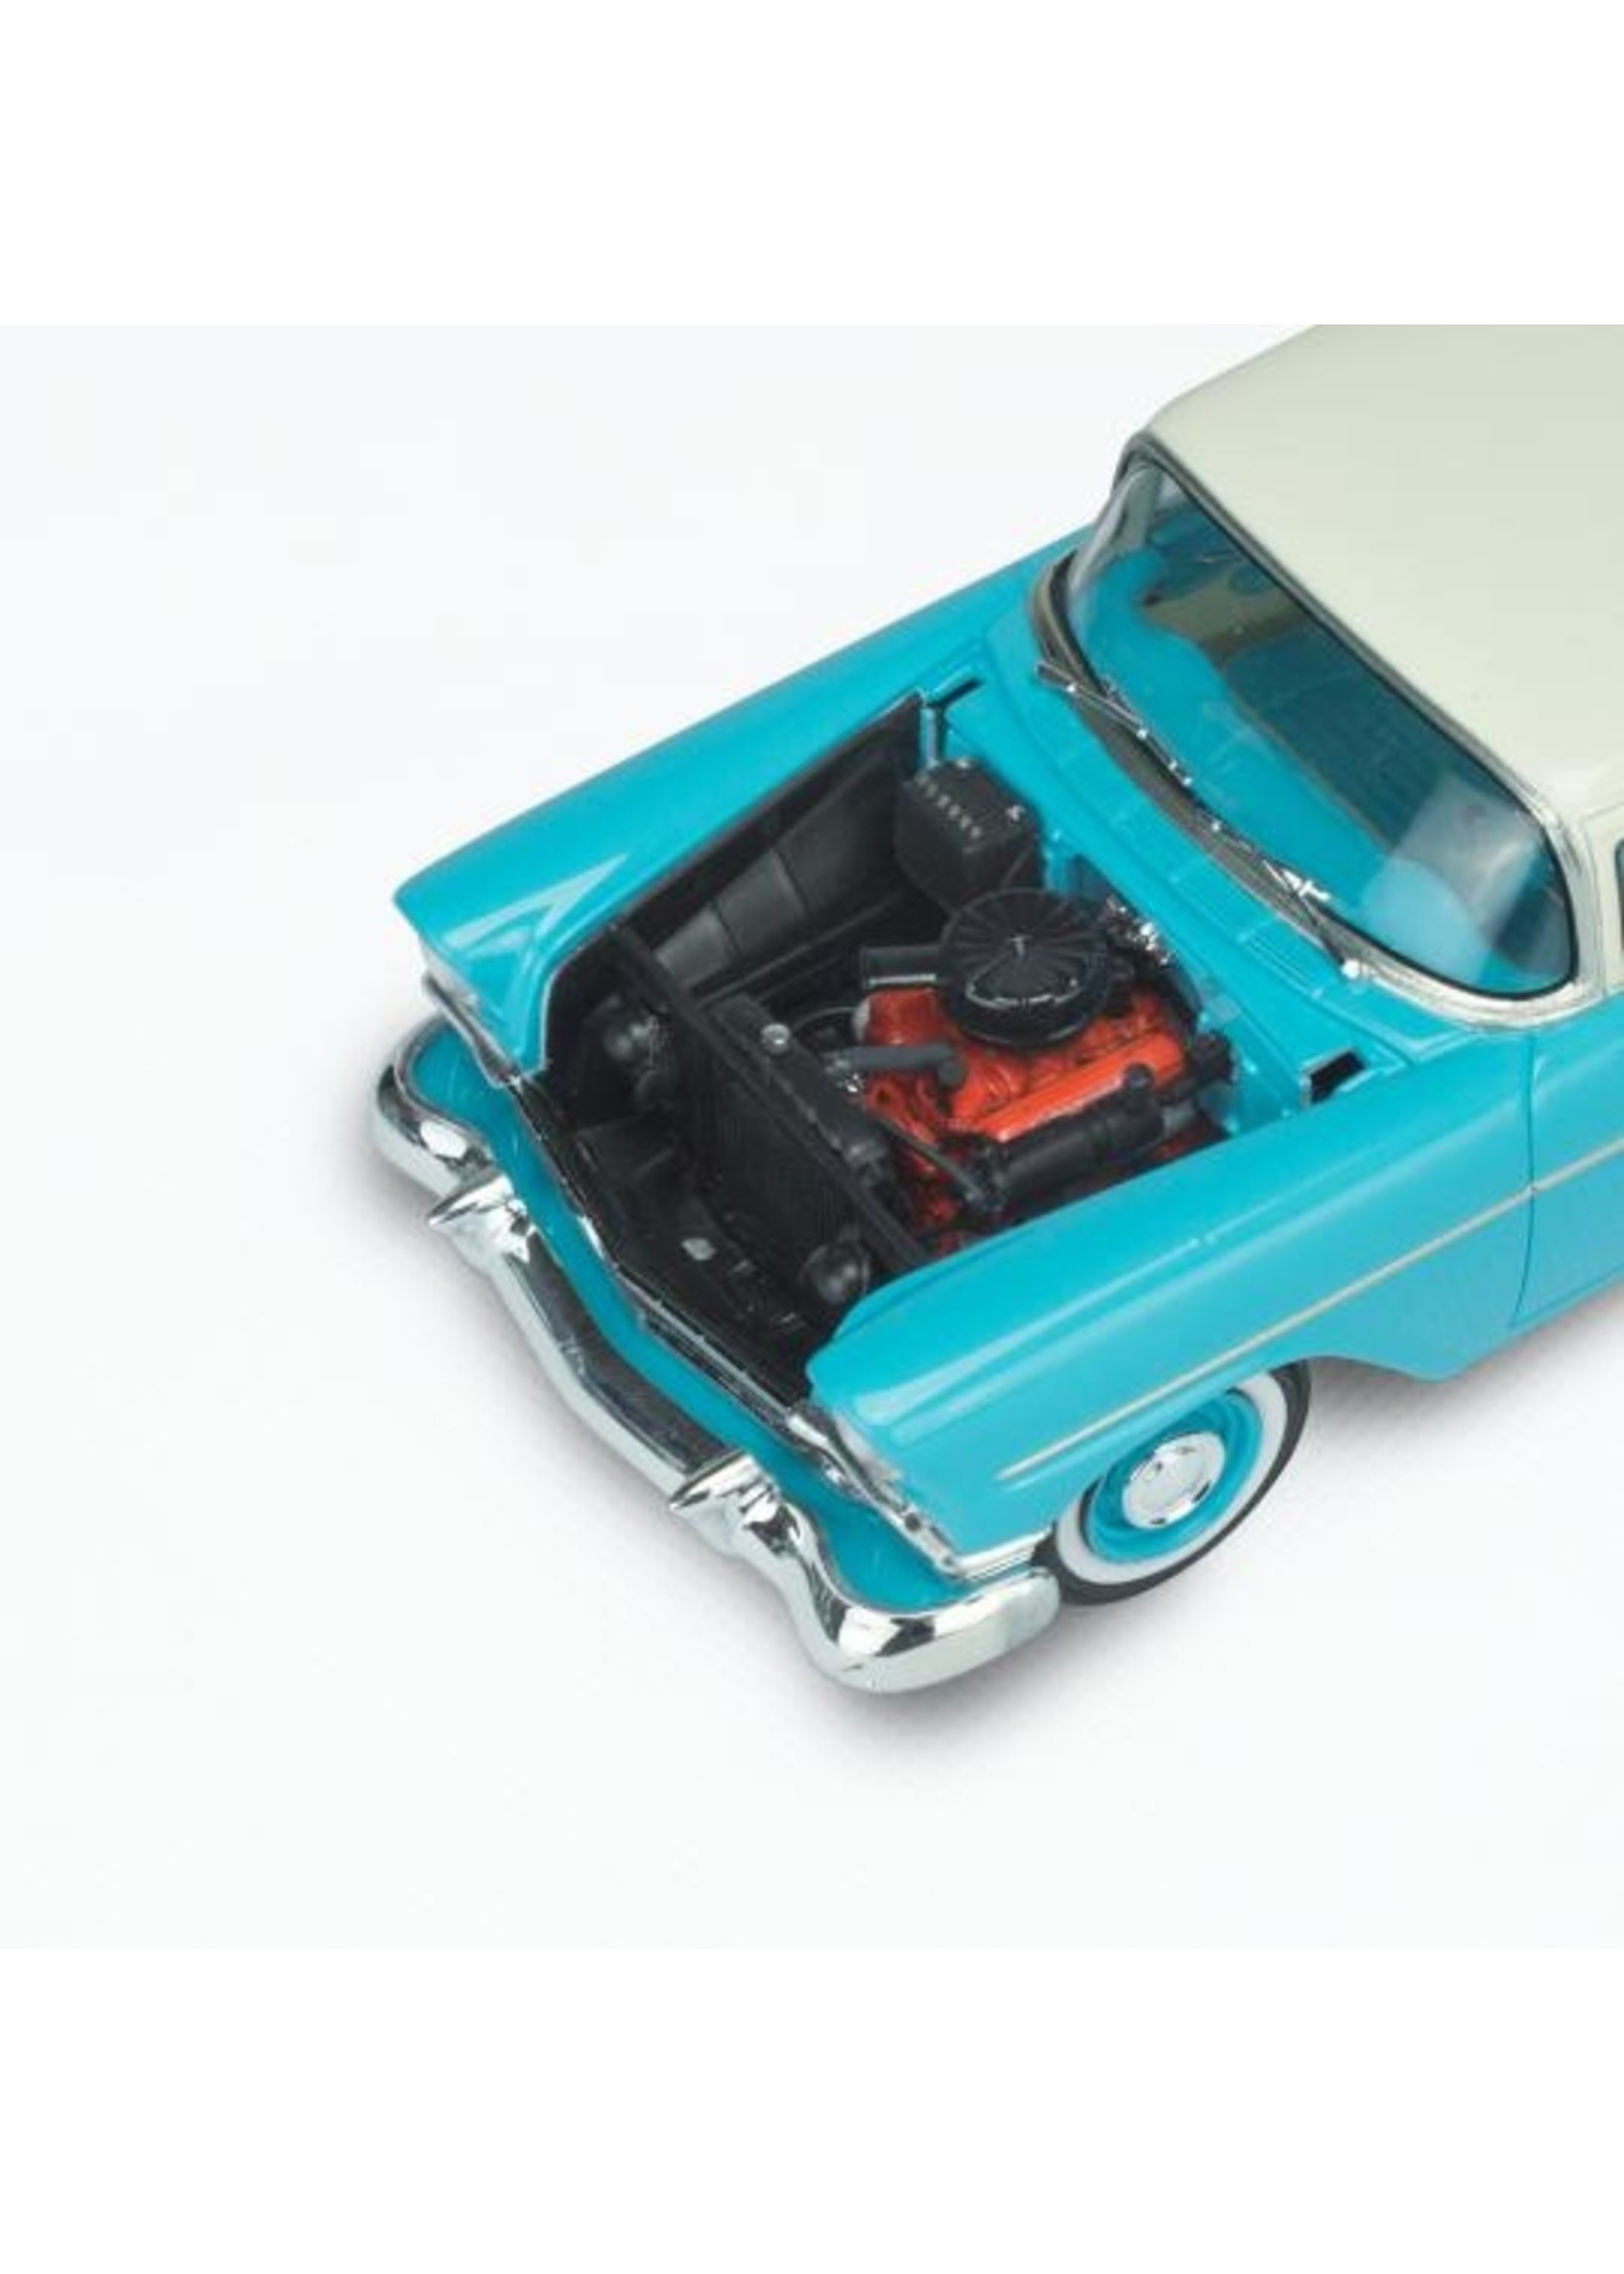 Revell 4504 - 1/25 1956 Chevy Del Ray 2n1